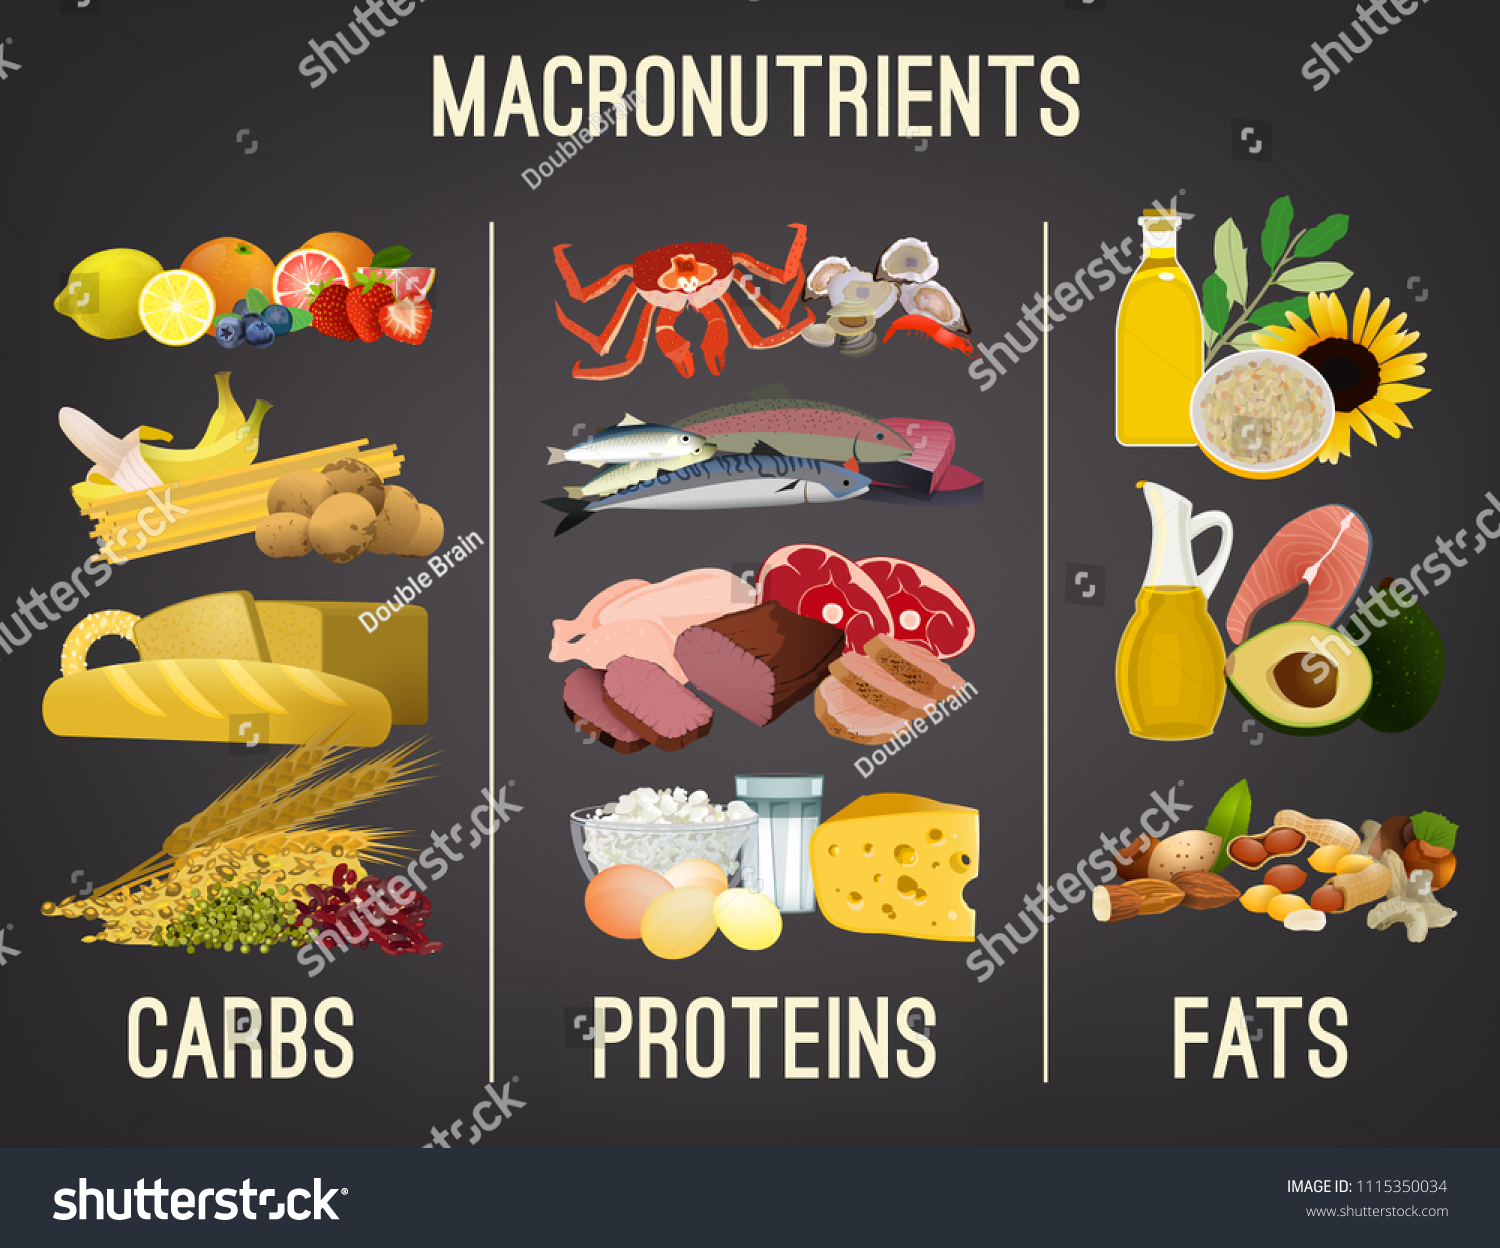 Main Food Groups Macronutrients Carbohydrates Royalty Free Stock Vector 1115350034 1145